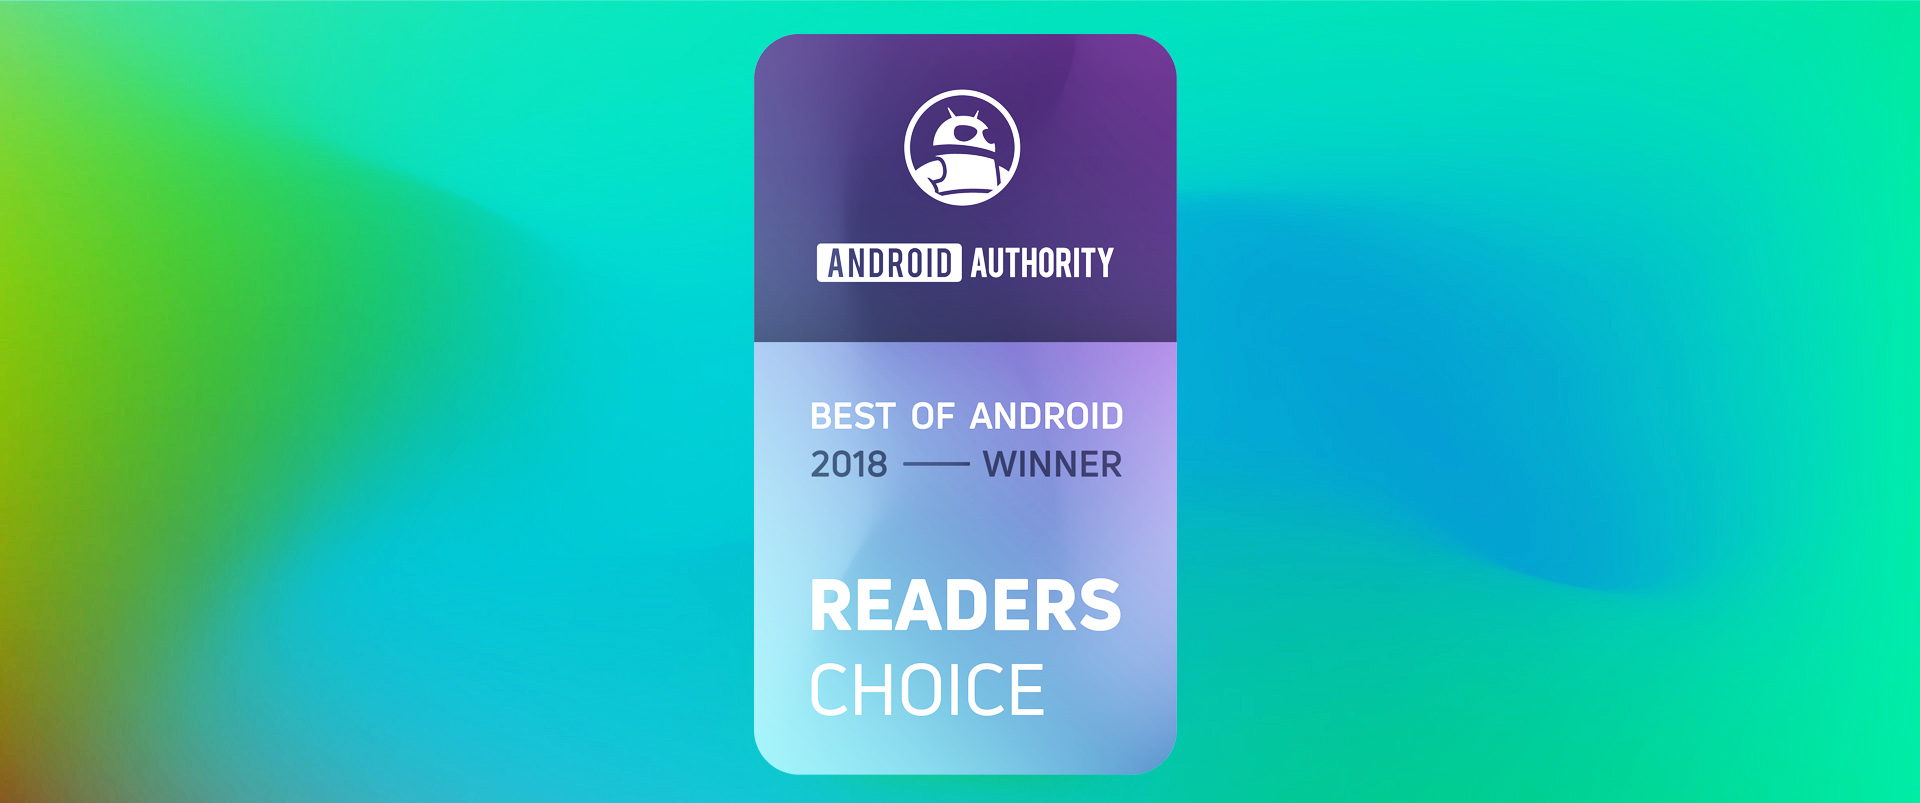 Best of Android reader's choice